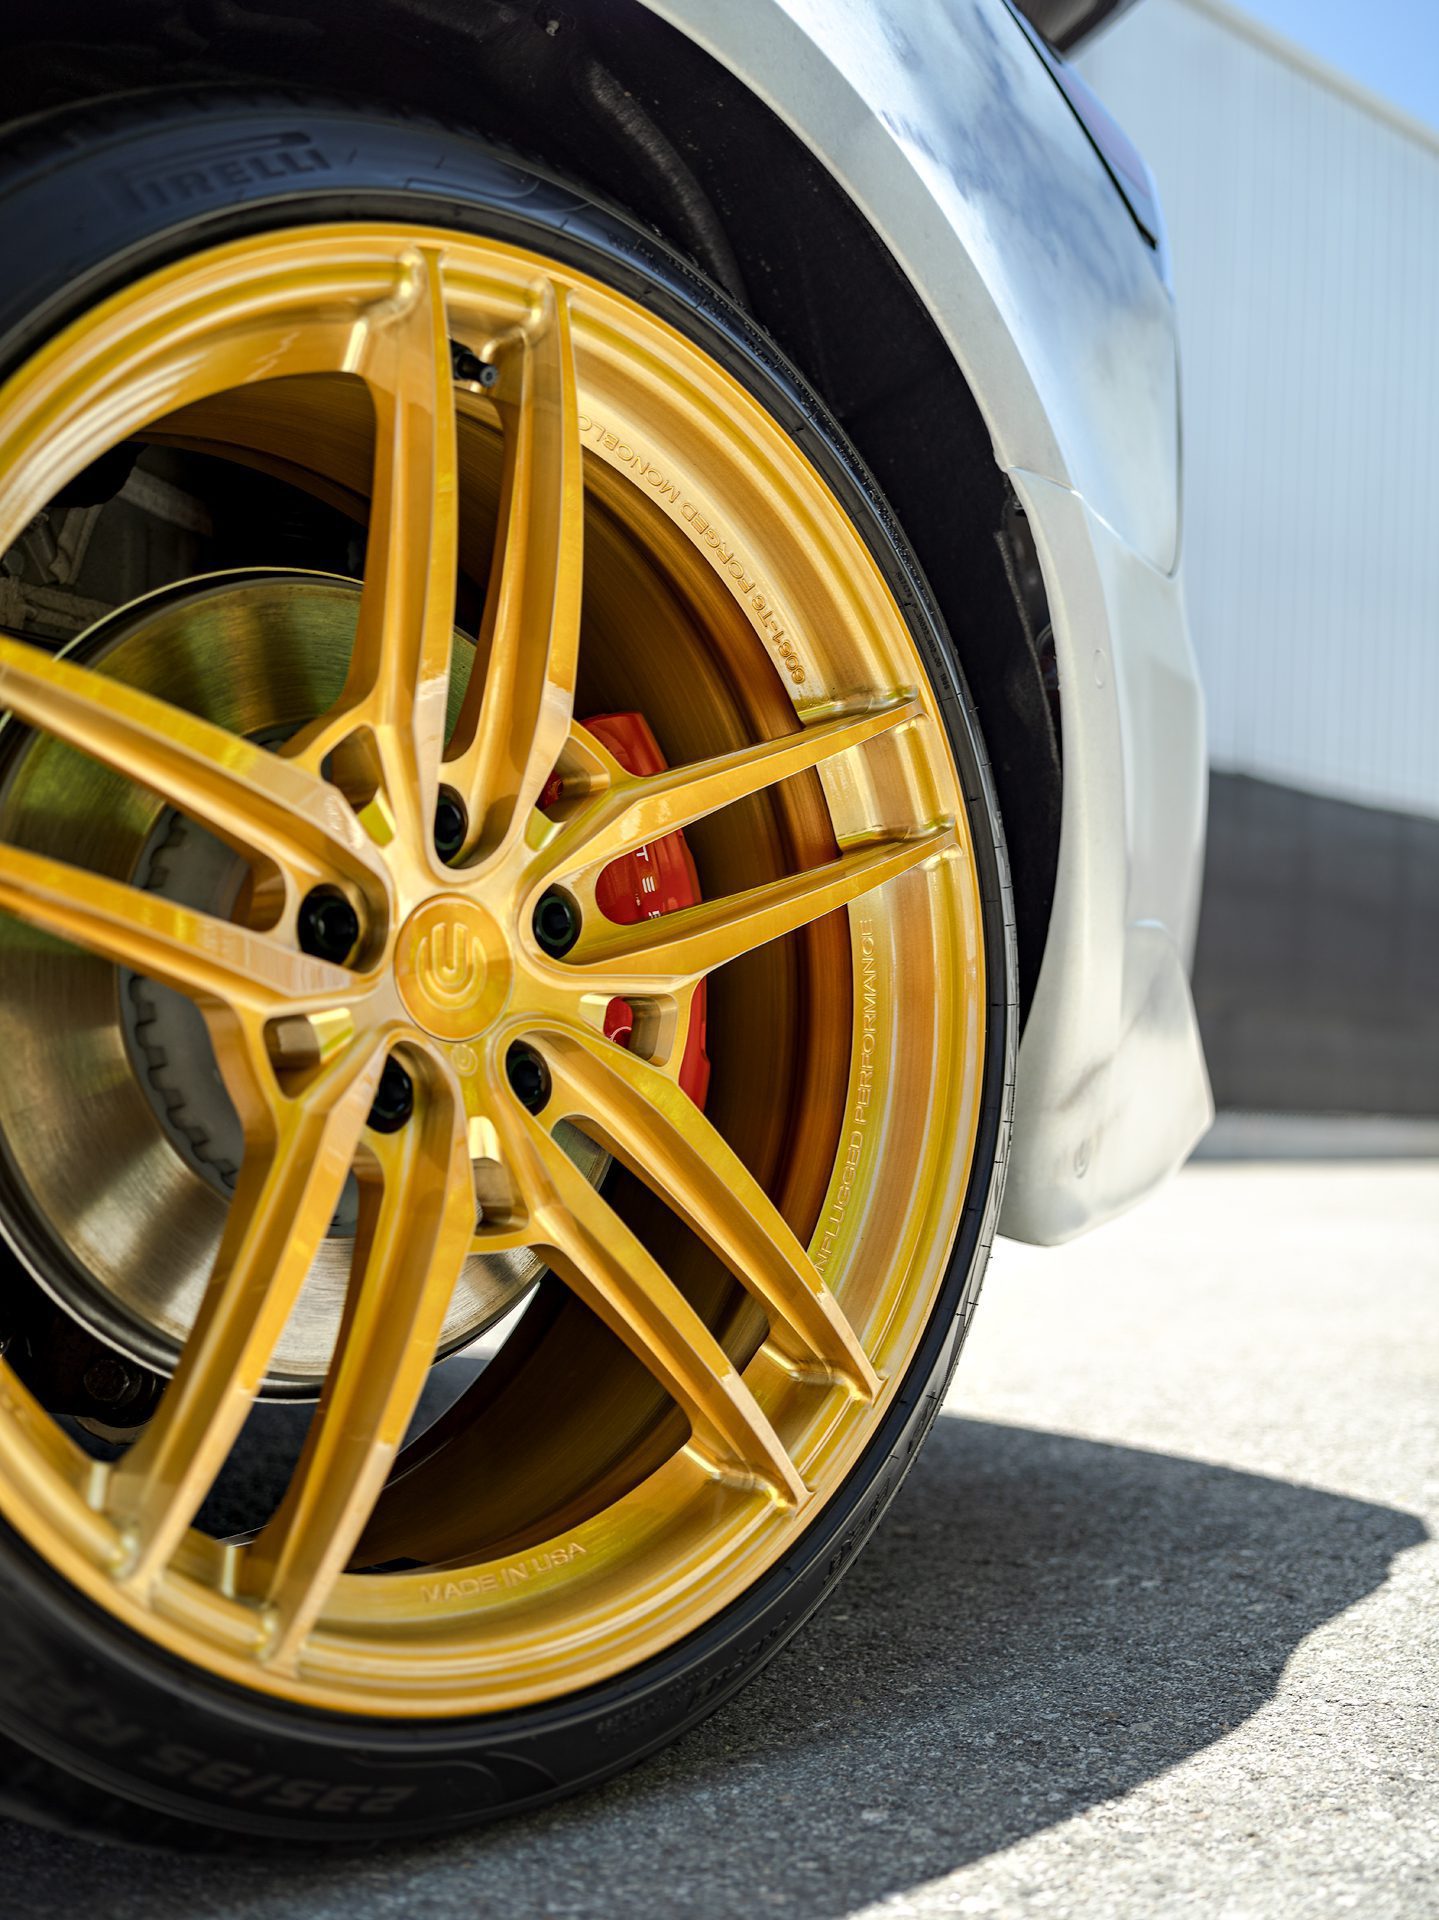 Tesla Model 3 Performance - Unplugged Performance UP-04 Lightweight Forged Wheels In a Gold Finish